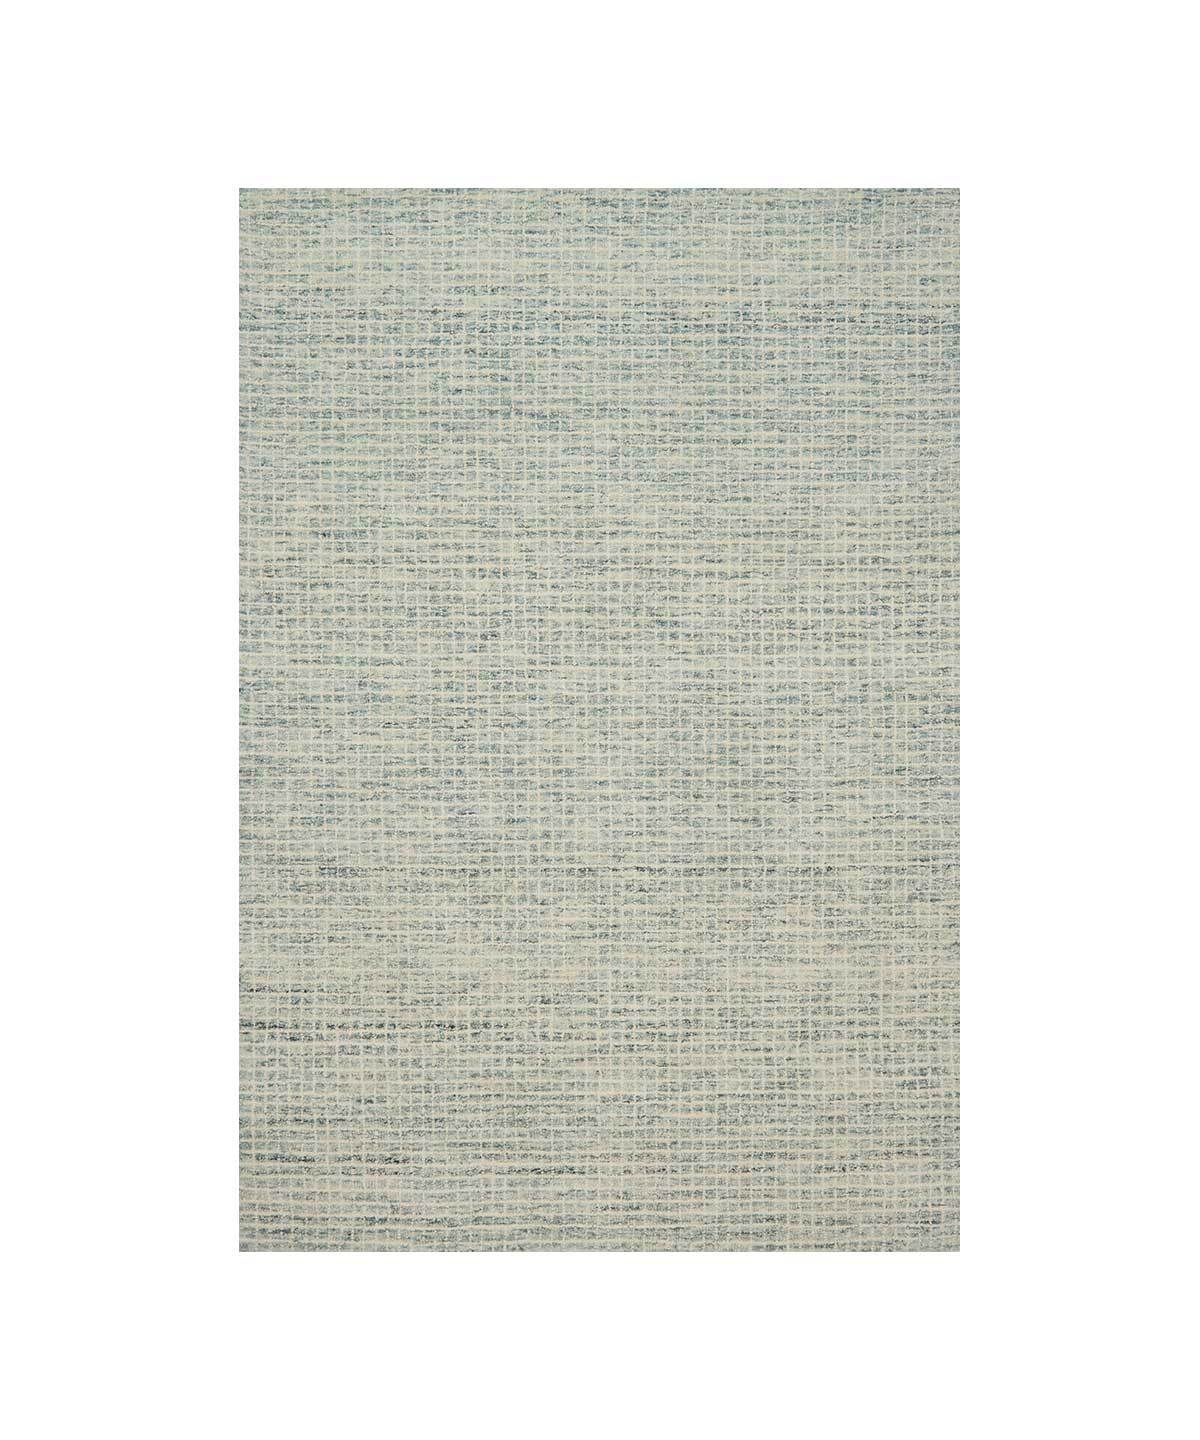 Giana Rug in Spa by Loloi | TRNK